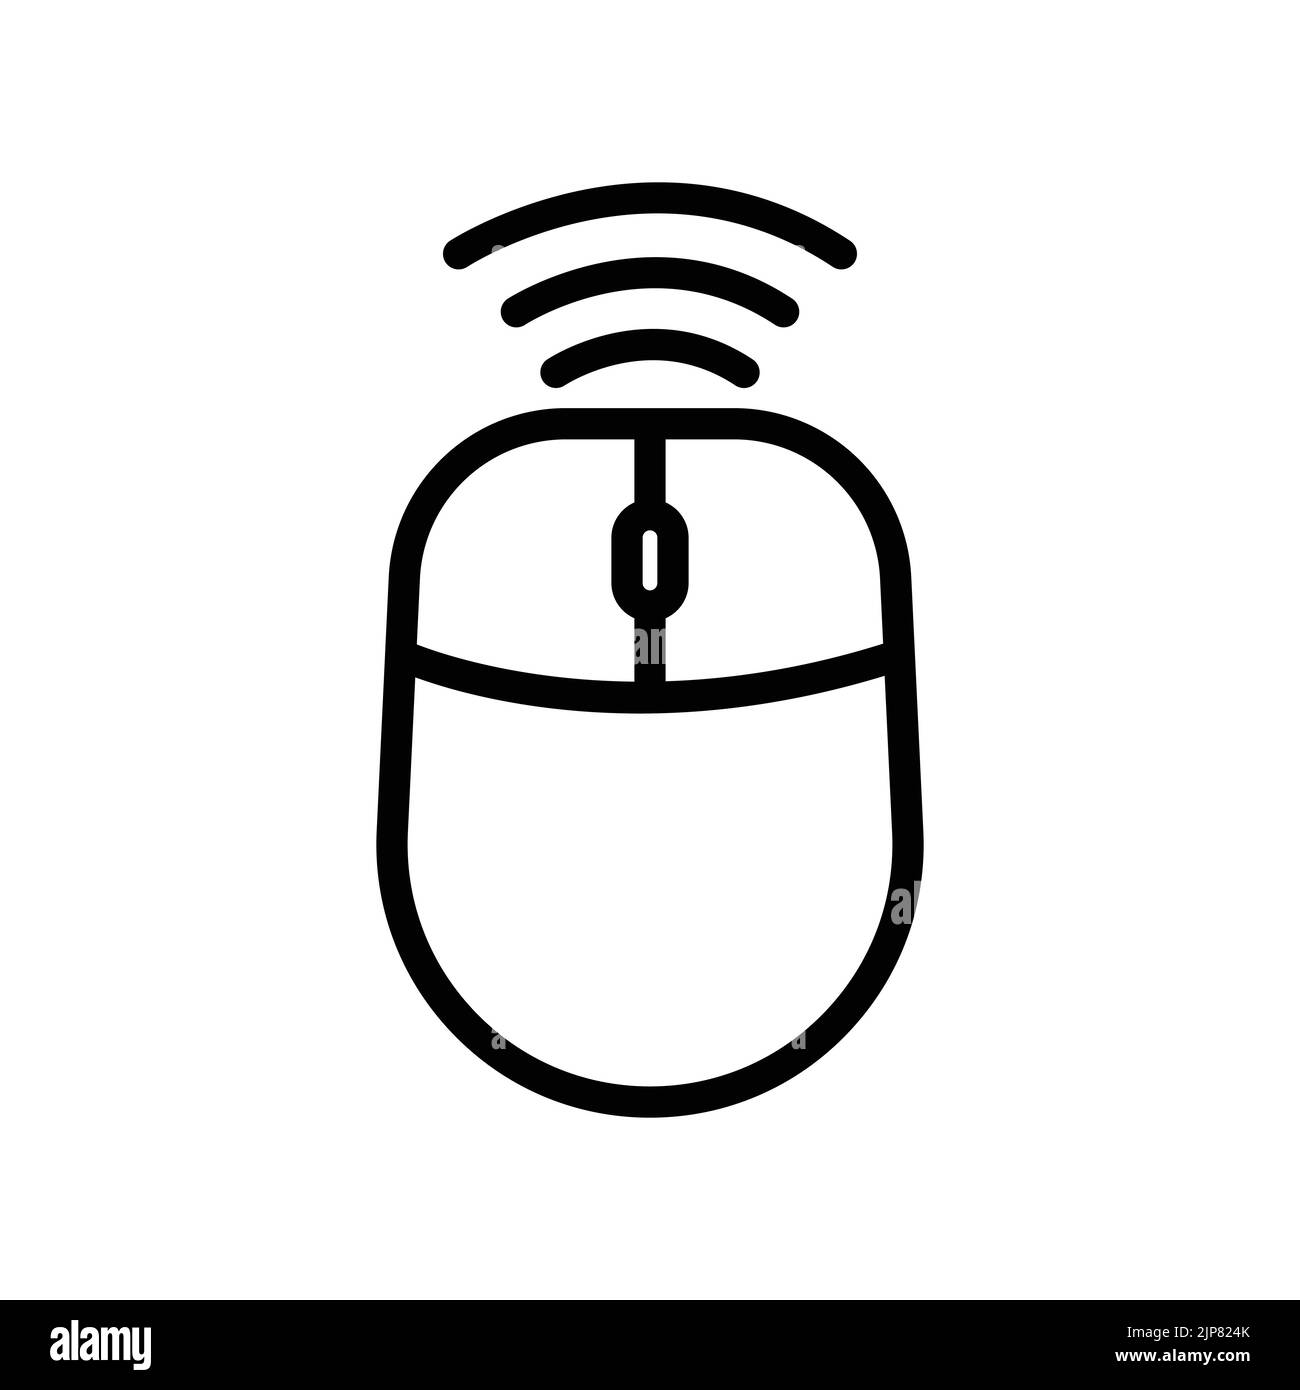 Computer mouse icon with signal. icon related to technology. smart device. line icon style. Simple design editable Stock Vector